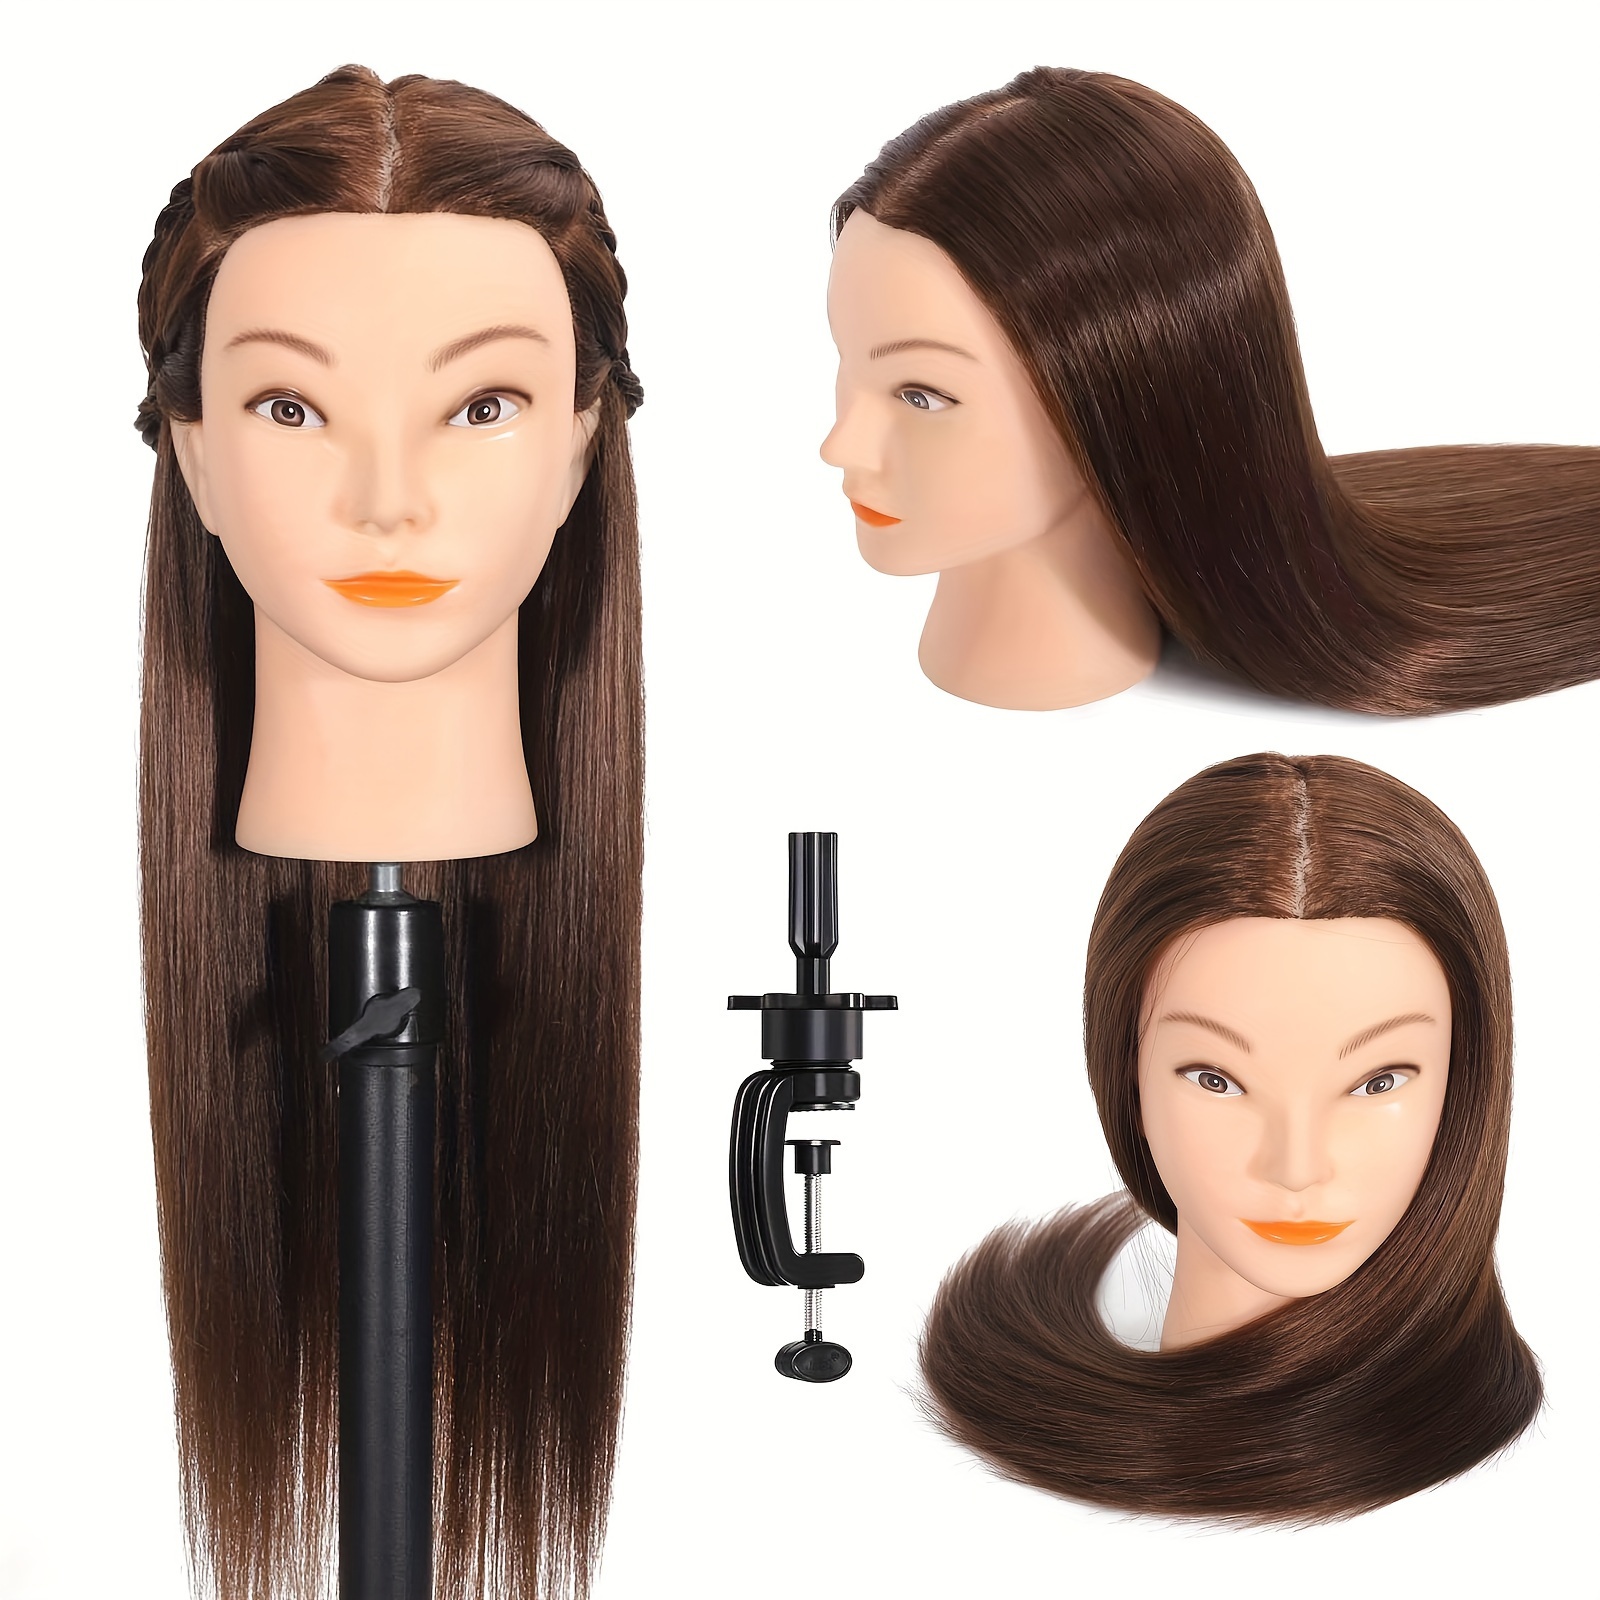 Premium Mannequin Head With Bicolor Hair Cosmetology Mannequin Doll Head  For Practice Braiding Styling Training Head